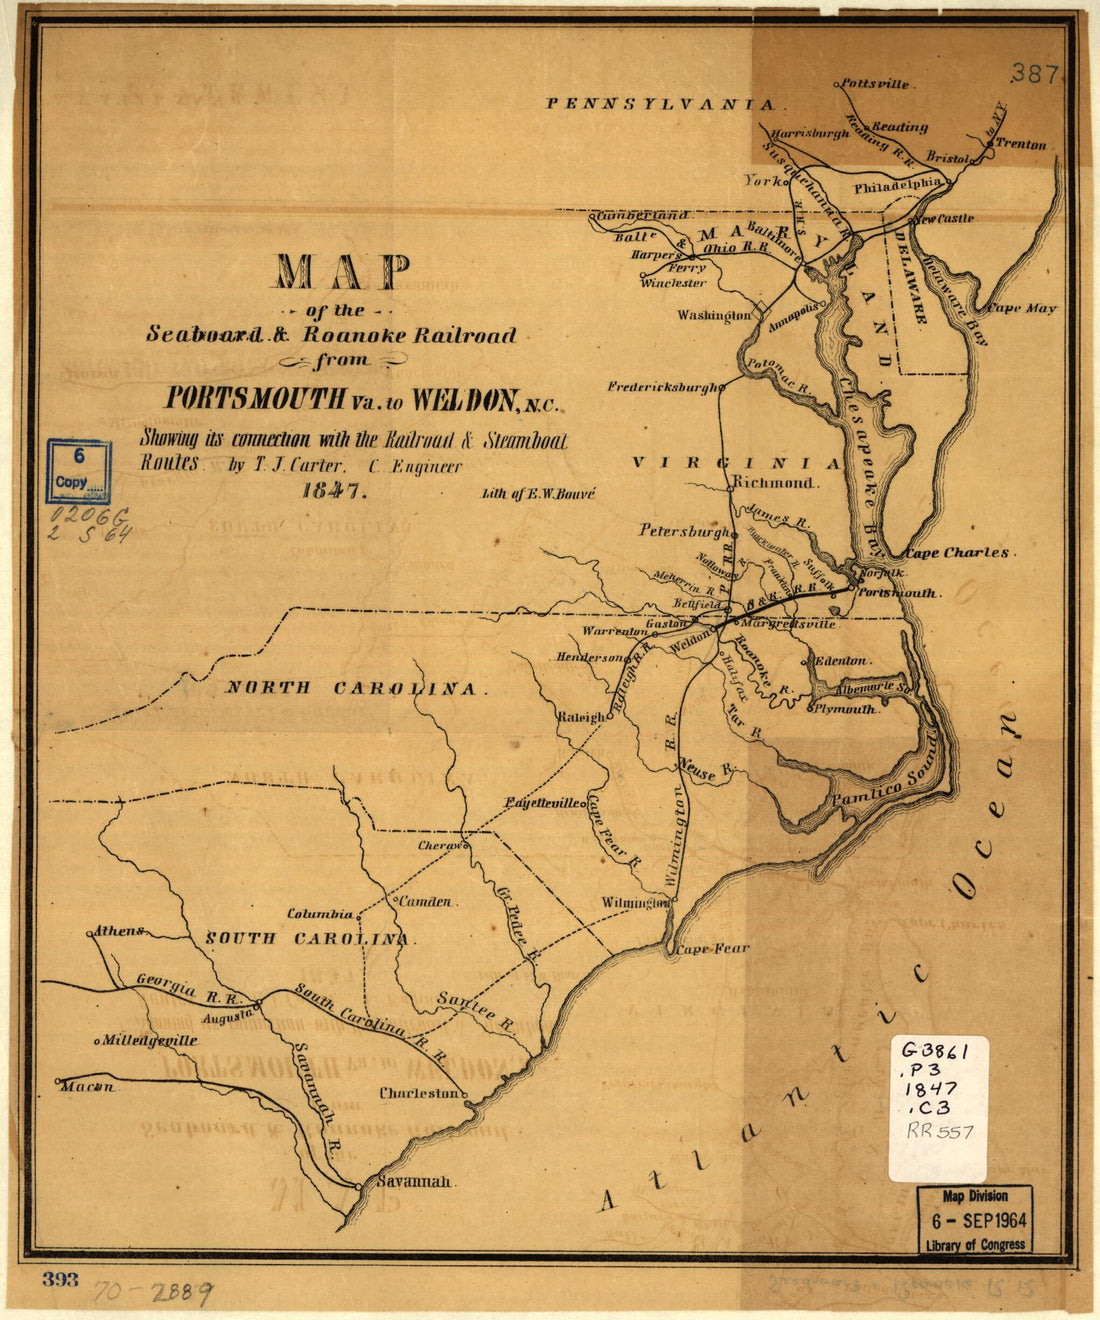 This old map of Map of the Seaboard &amp; Roanoke Railroad from Portsmouth, Va. to Weldon, N.C. Showing Its Connection With Railroad &amp; Steamboat Routes from 1847 was created by Ephraim W. Bouvé, T. J. Carter in 1847